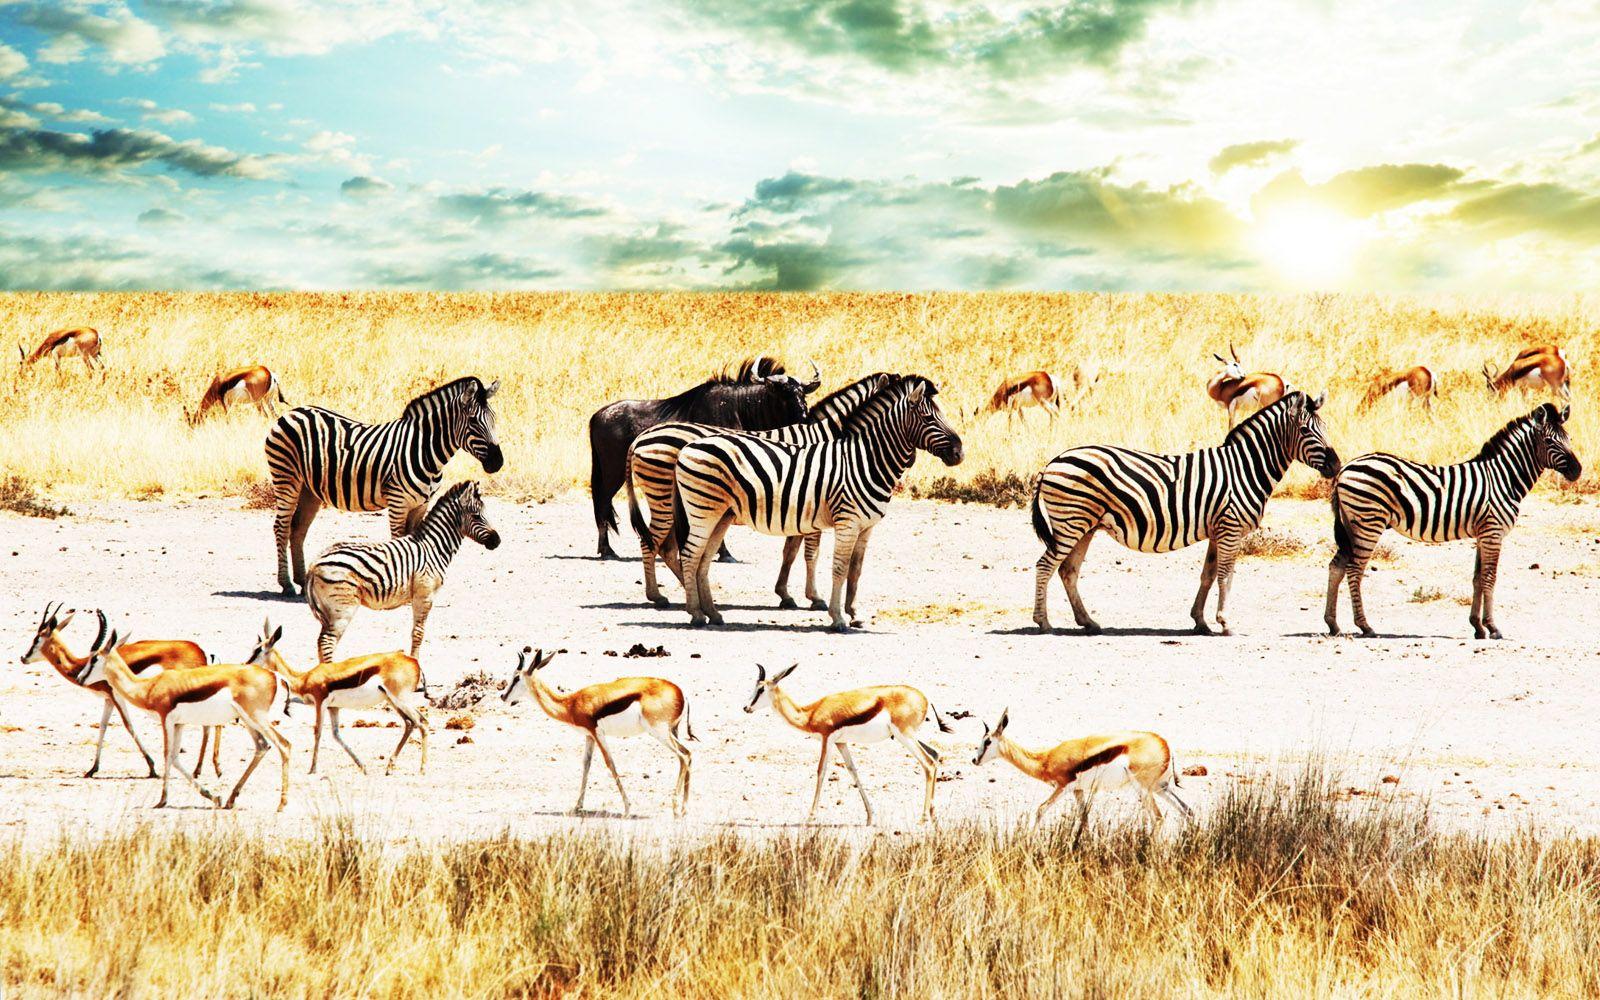 Central Wallpaper: Colors of Nature Zebras HD Wallpapers